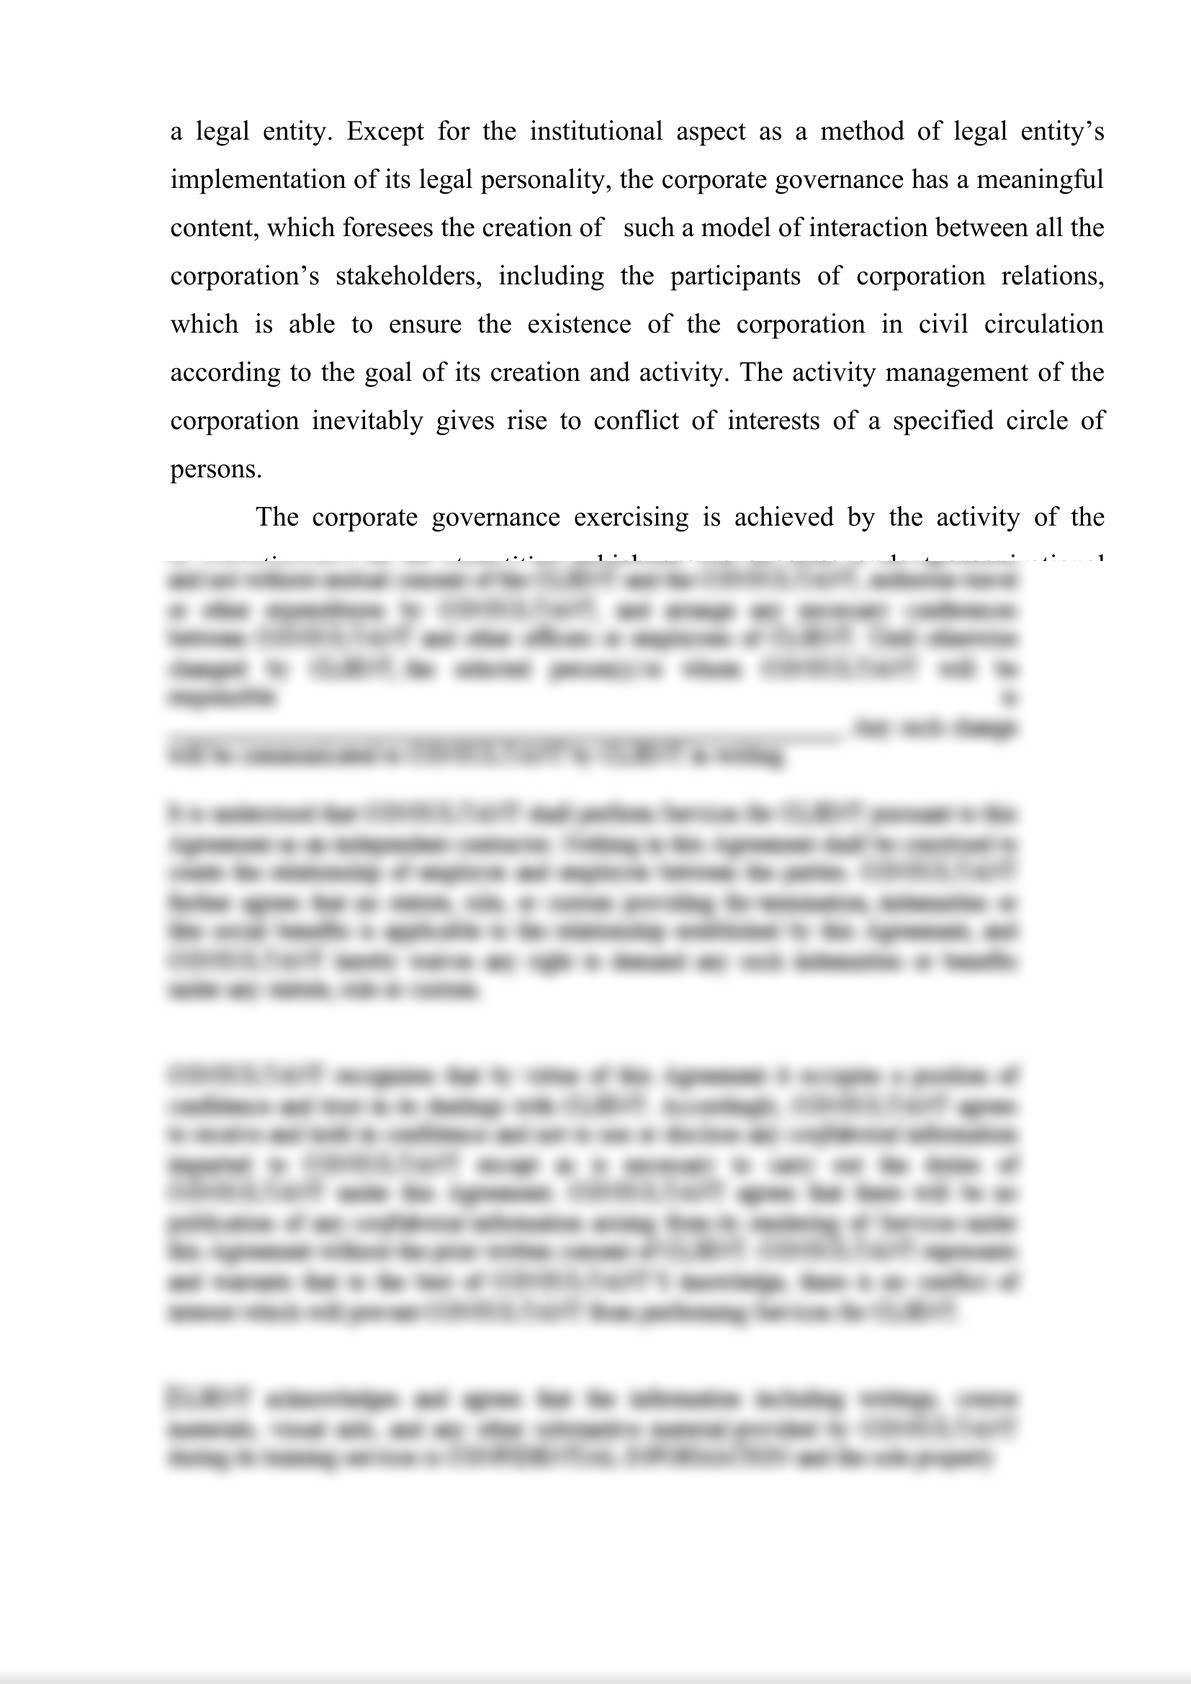 LEGAL ASPECTS OF THE CORPORATE GOVERNANCE-1